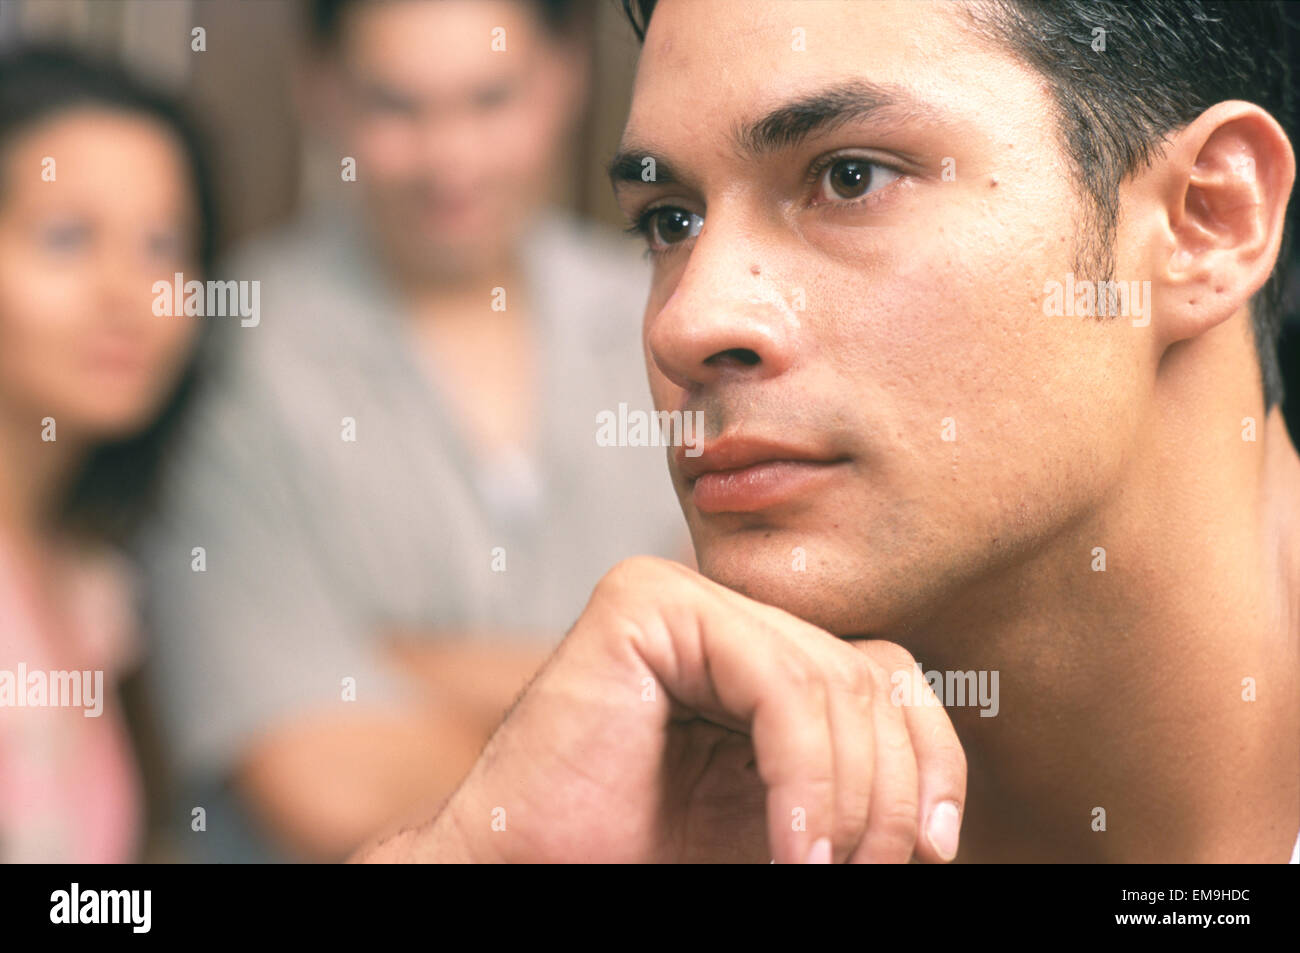 Portrait of contemplative man with couple in background Stock Photo